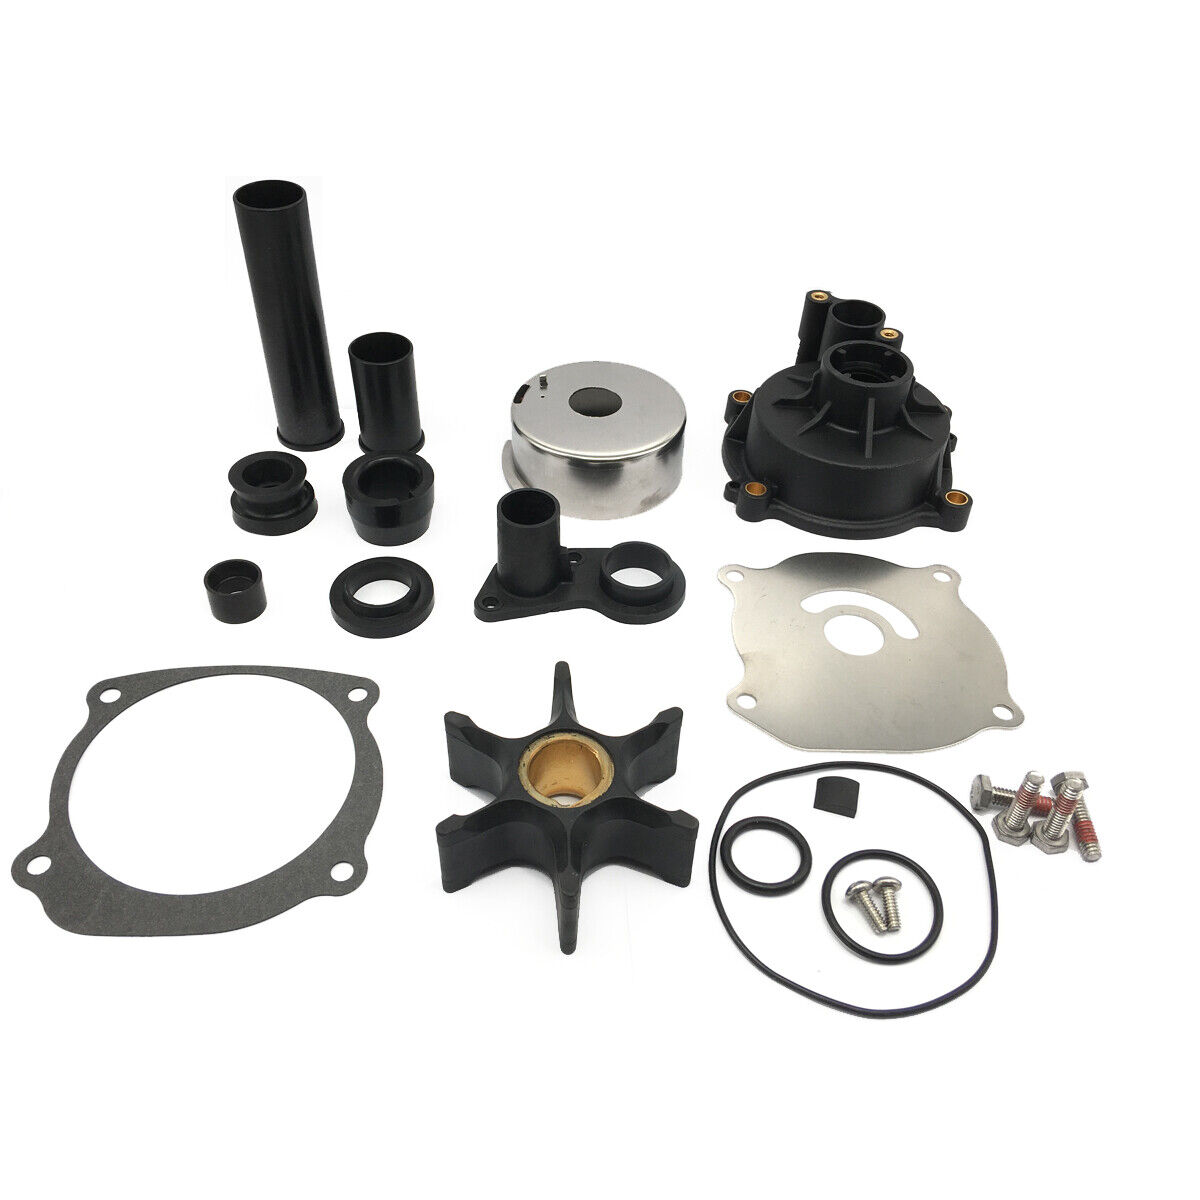 New Johnson Evinrude  Outboard Water Pump Kit OEM 5001595  Housing BRP/OMC